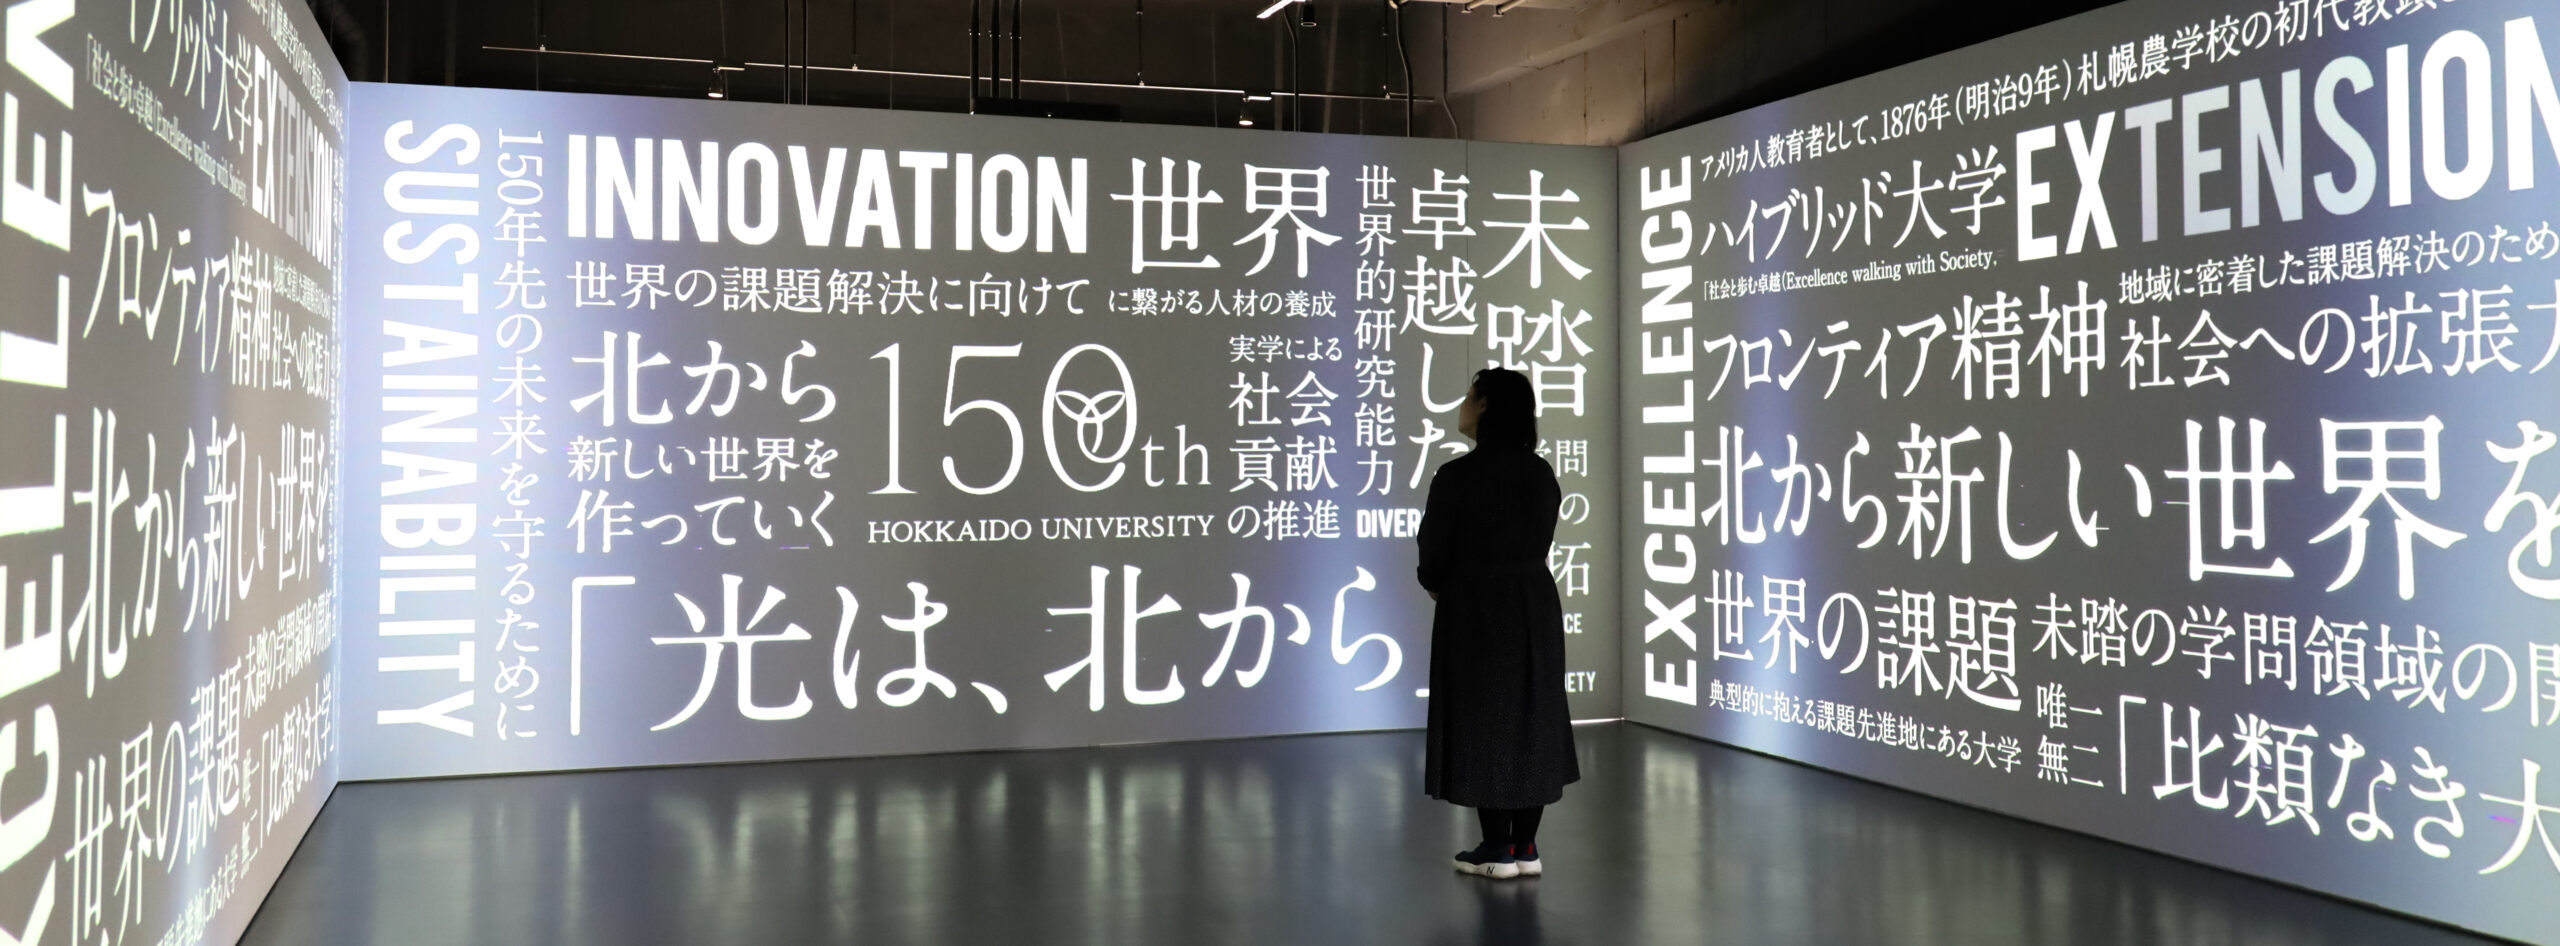 A person is standing in the middle of a three-wall projection room. The projection is displaying keywords in both English and Japanese on Hokkaido University's actions and visions.